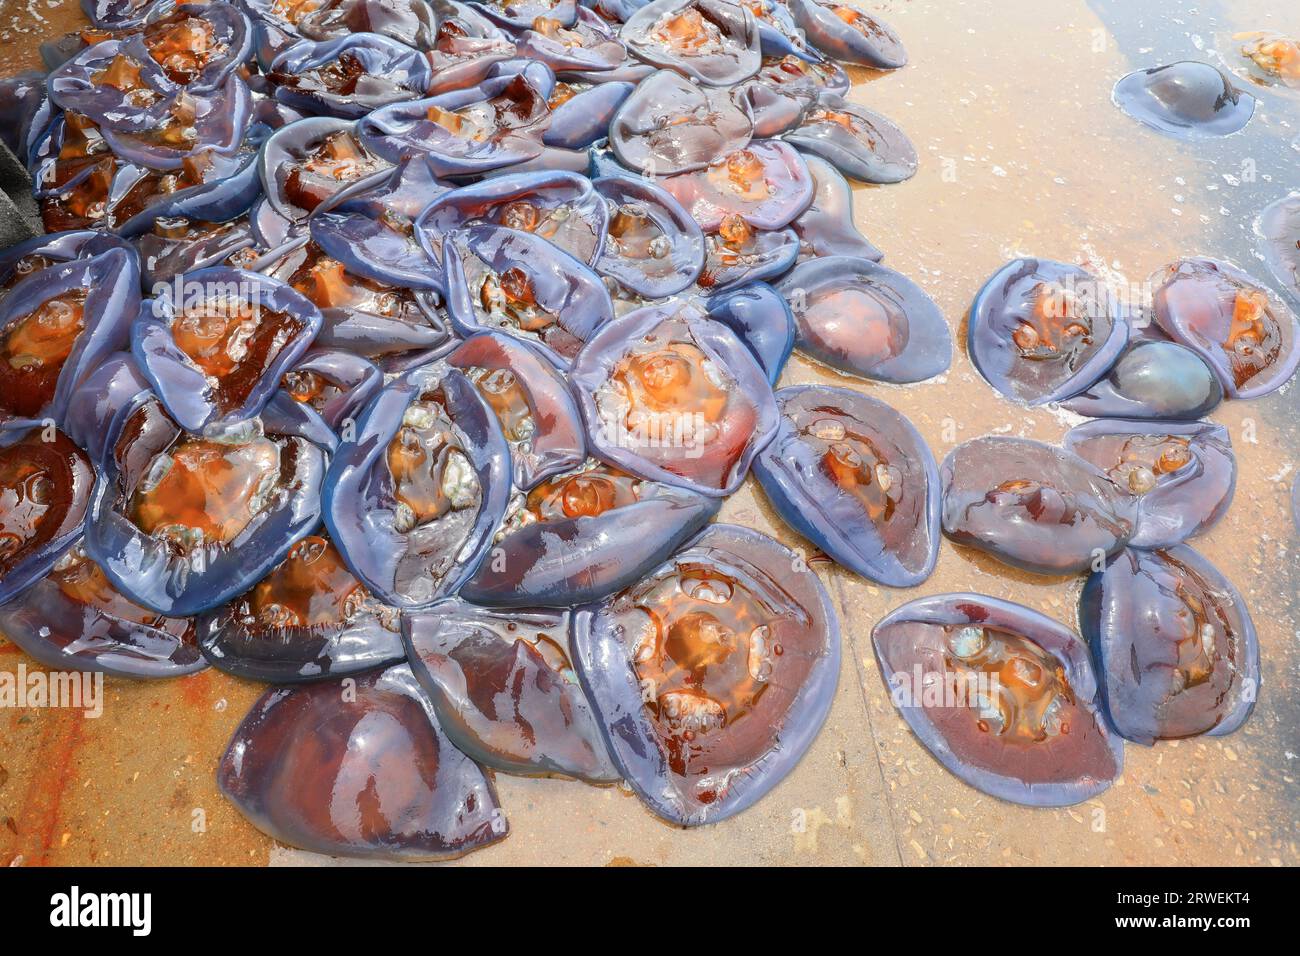 Jellyfish skin piled up on the cement floor in a seafood processing plant, North China Stock Photo